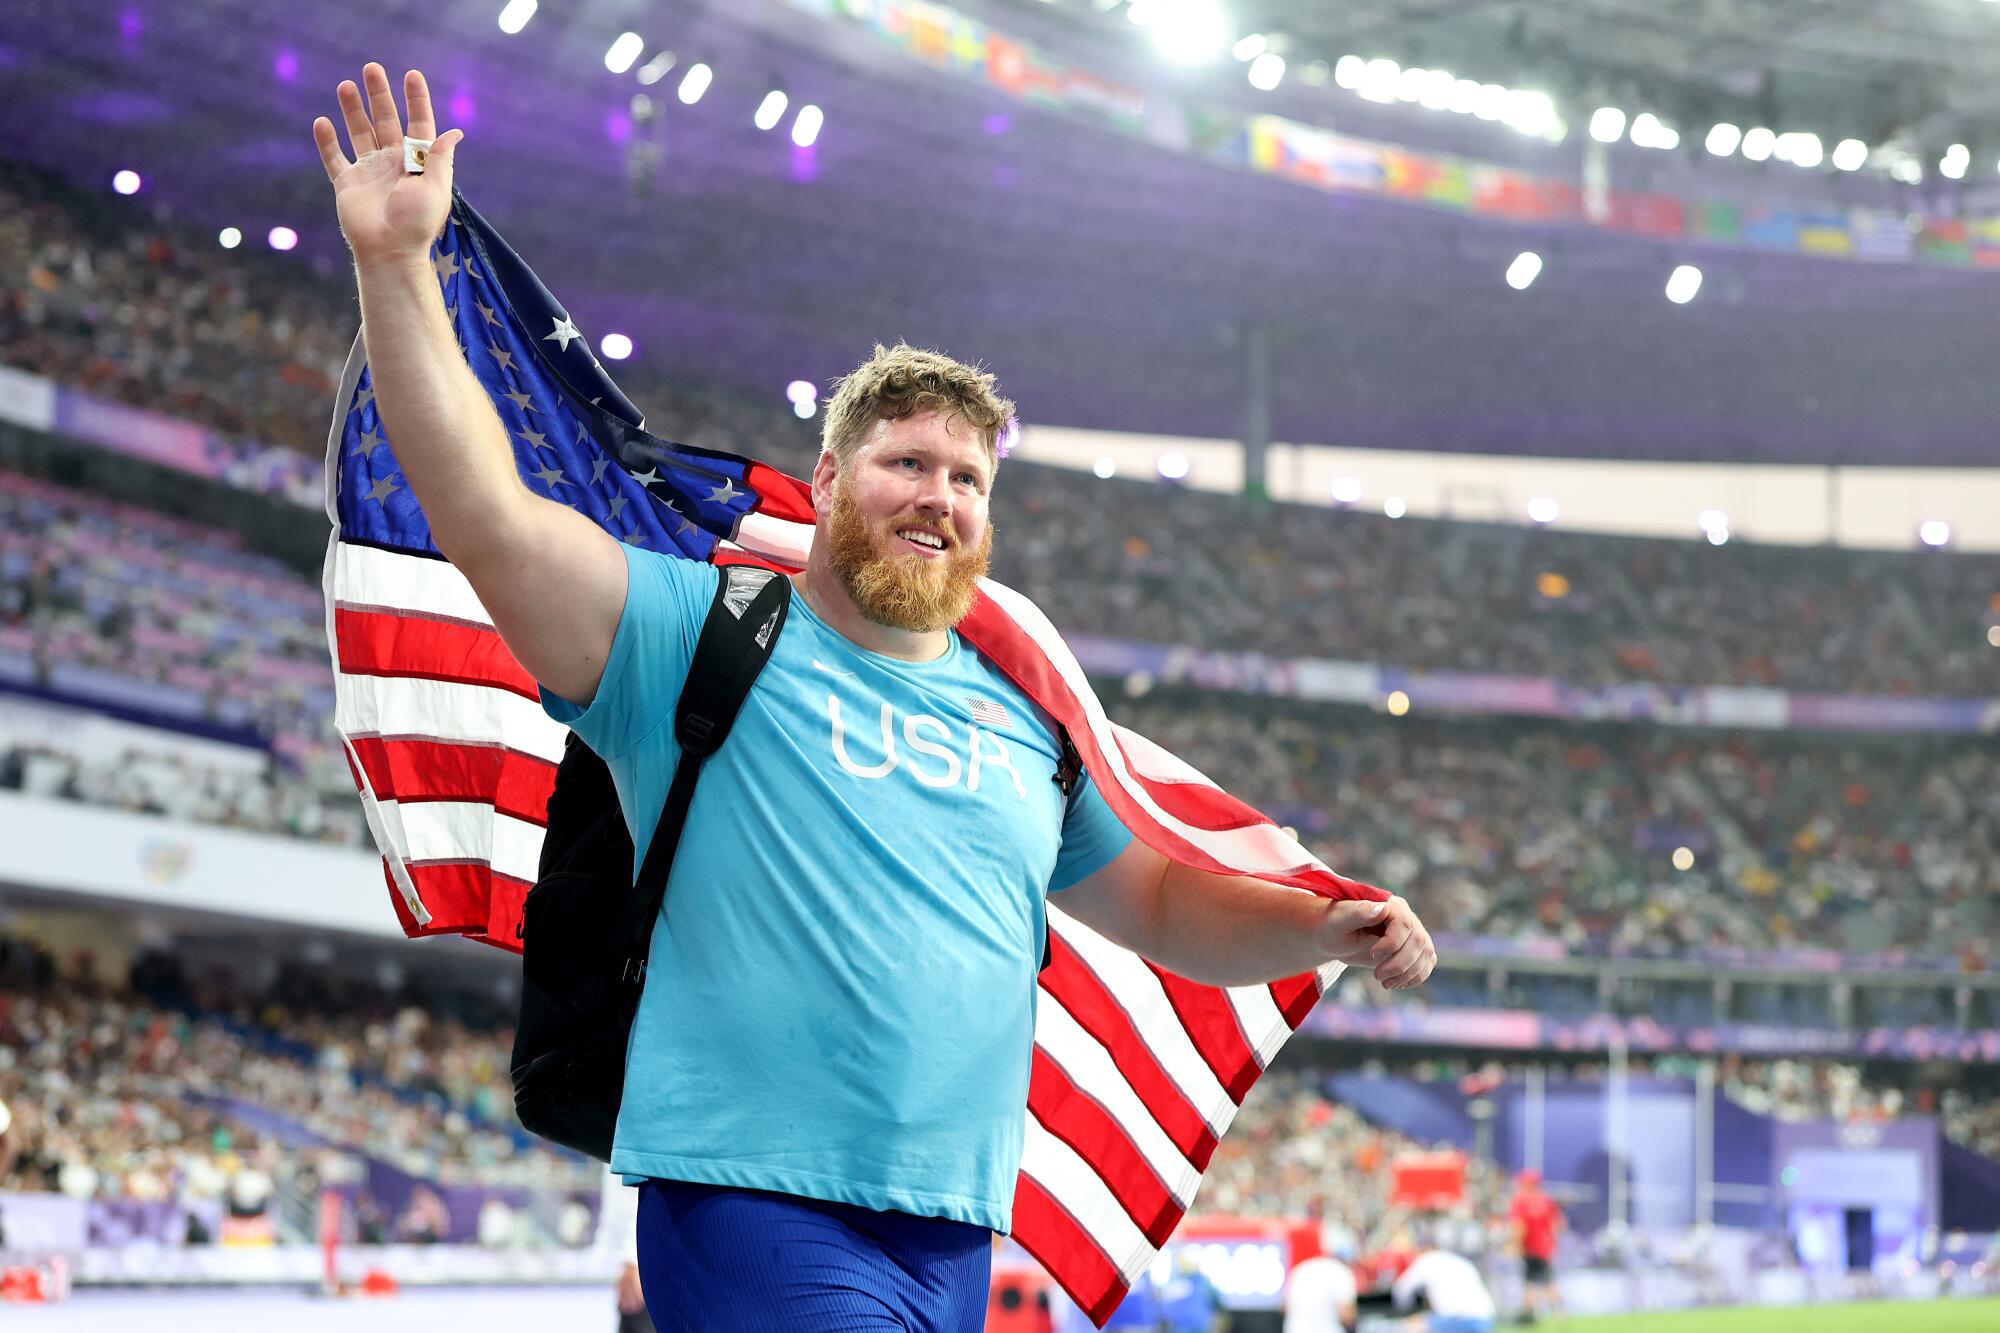 American Ryan Crouser is draped in a U.S. flag and waves in a stadium.